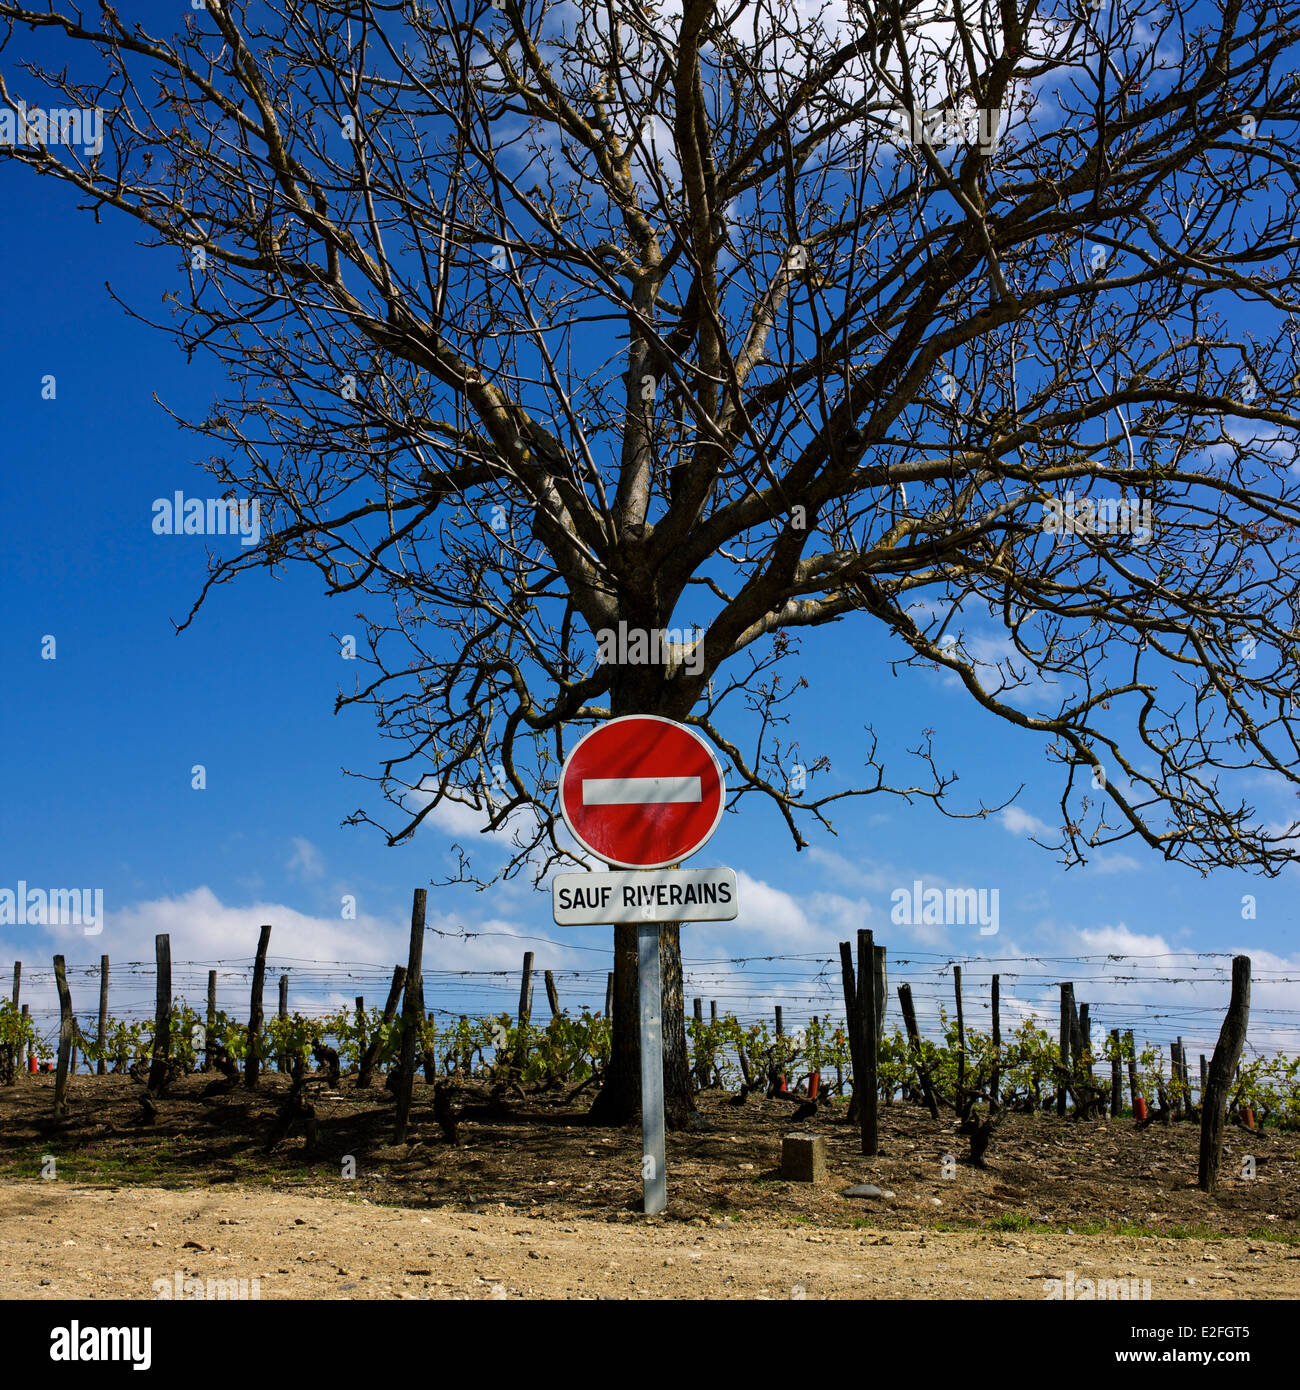 Residents Only / No Entry sign (Sauf Riverains), France Stock Photo